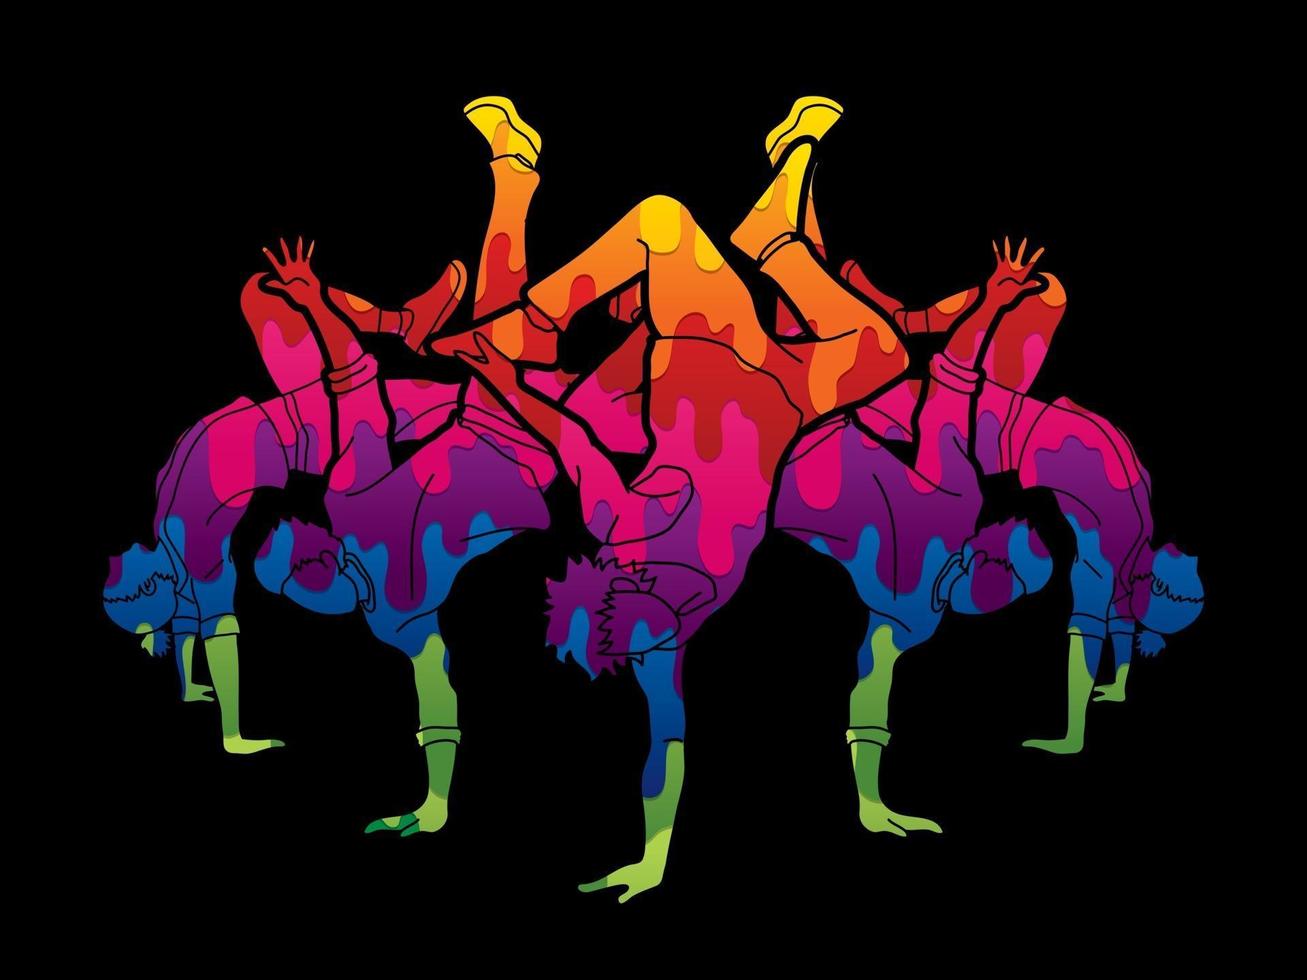 Group of People Dancing Street Dance Action Dance Together vector